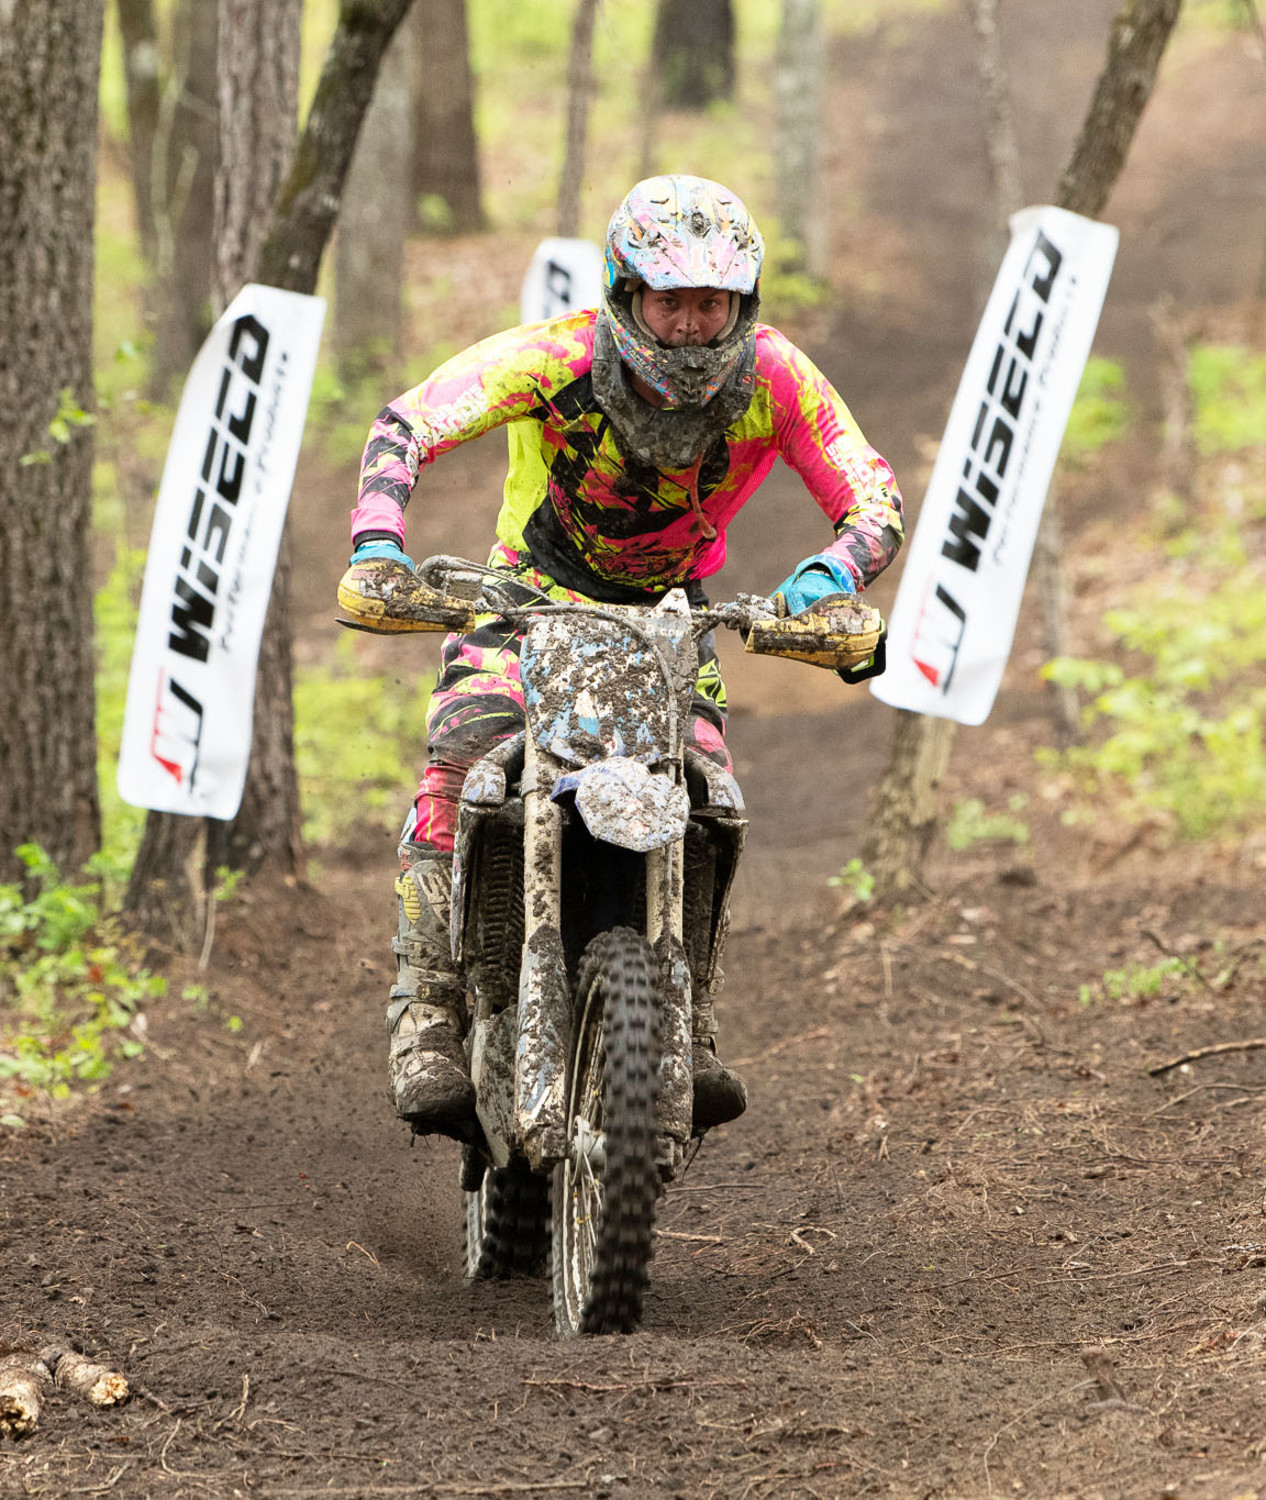 Sumter native Josh McCoy tries his luck at the GNCC Manning Live image